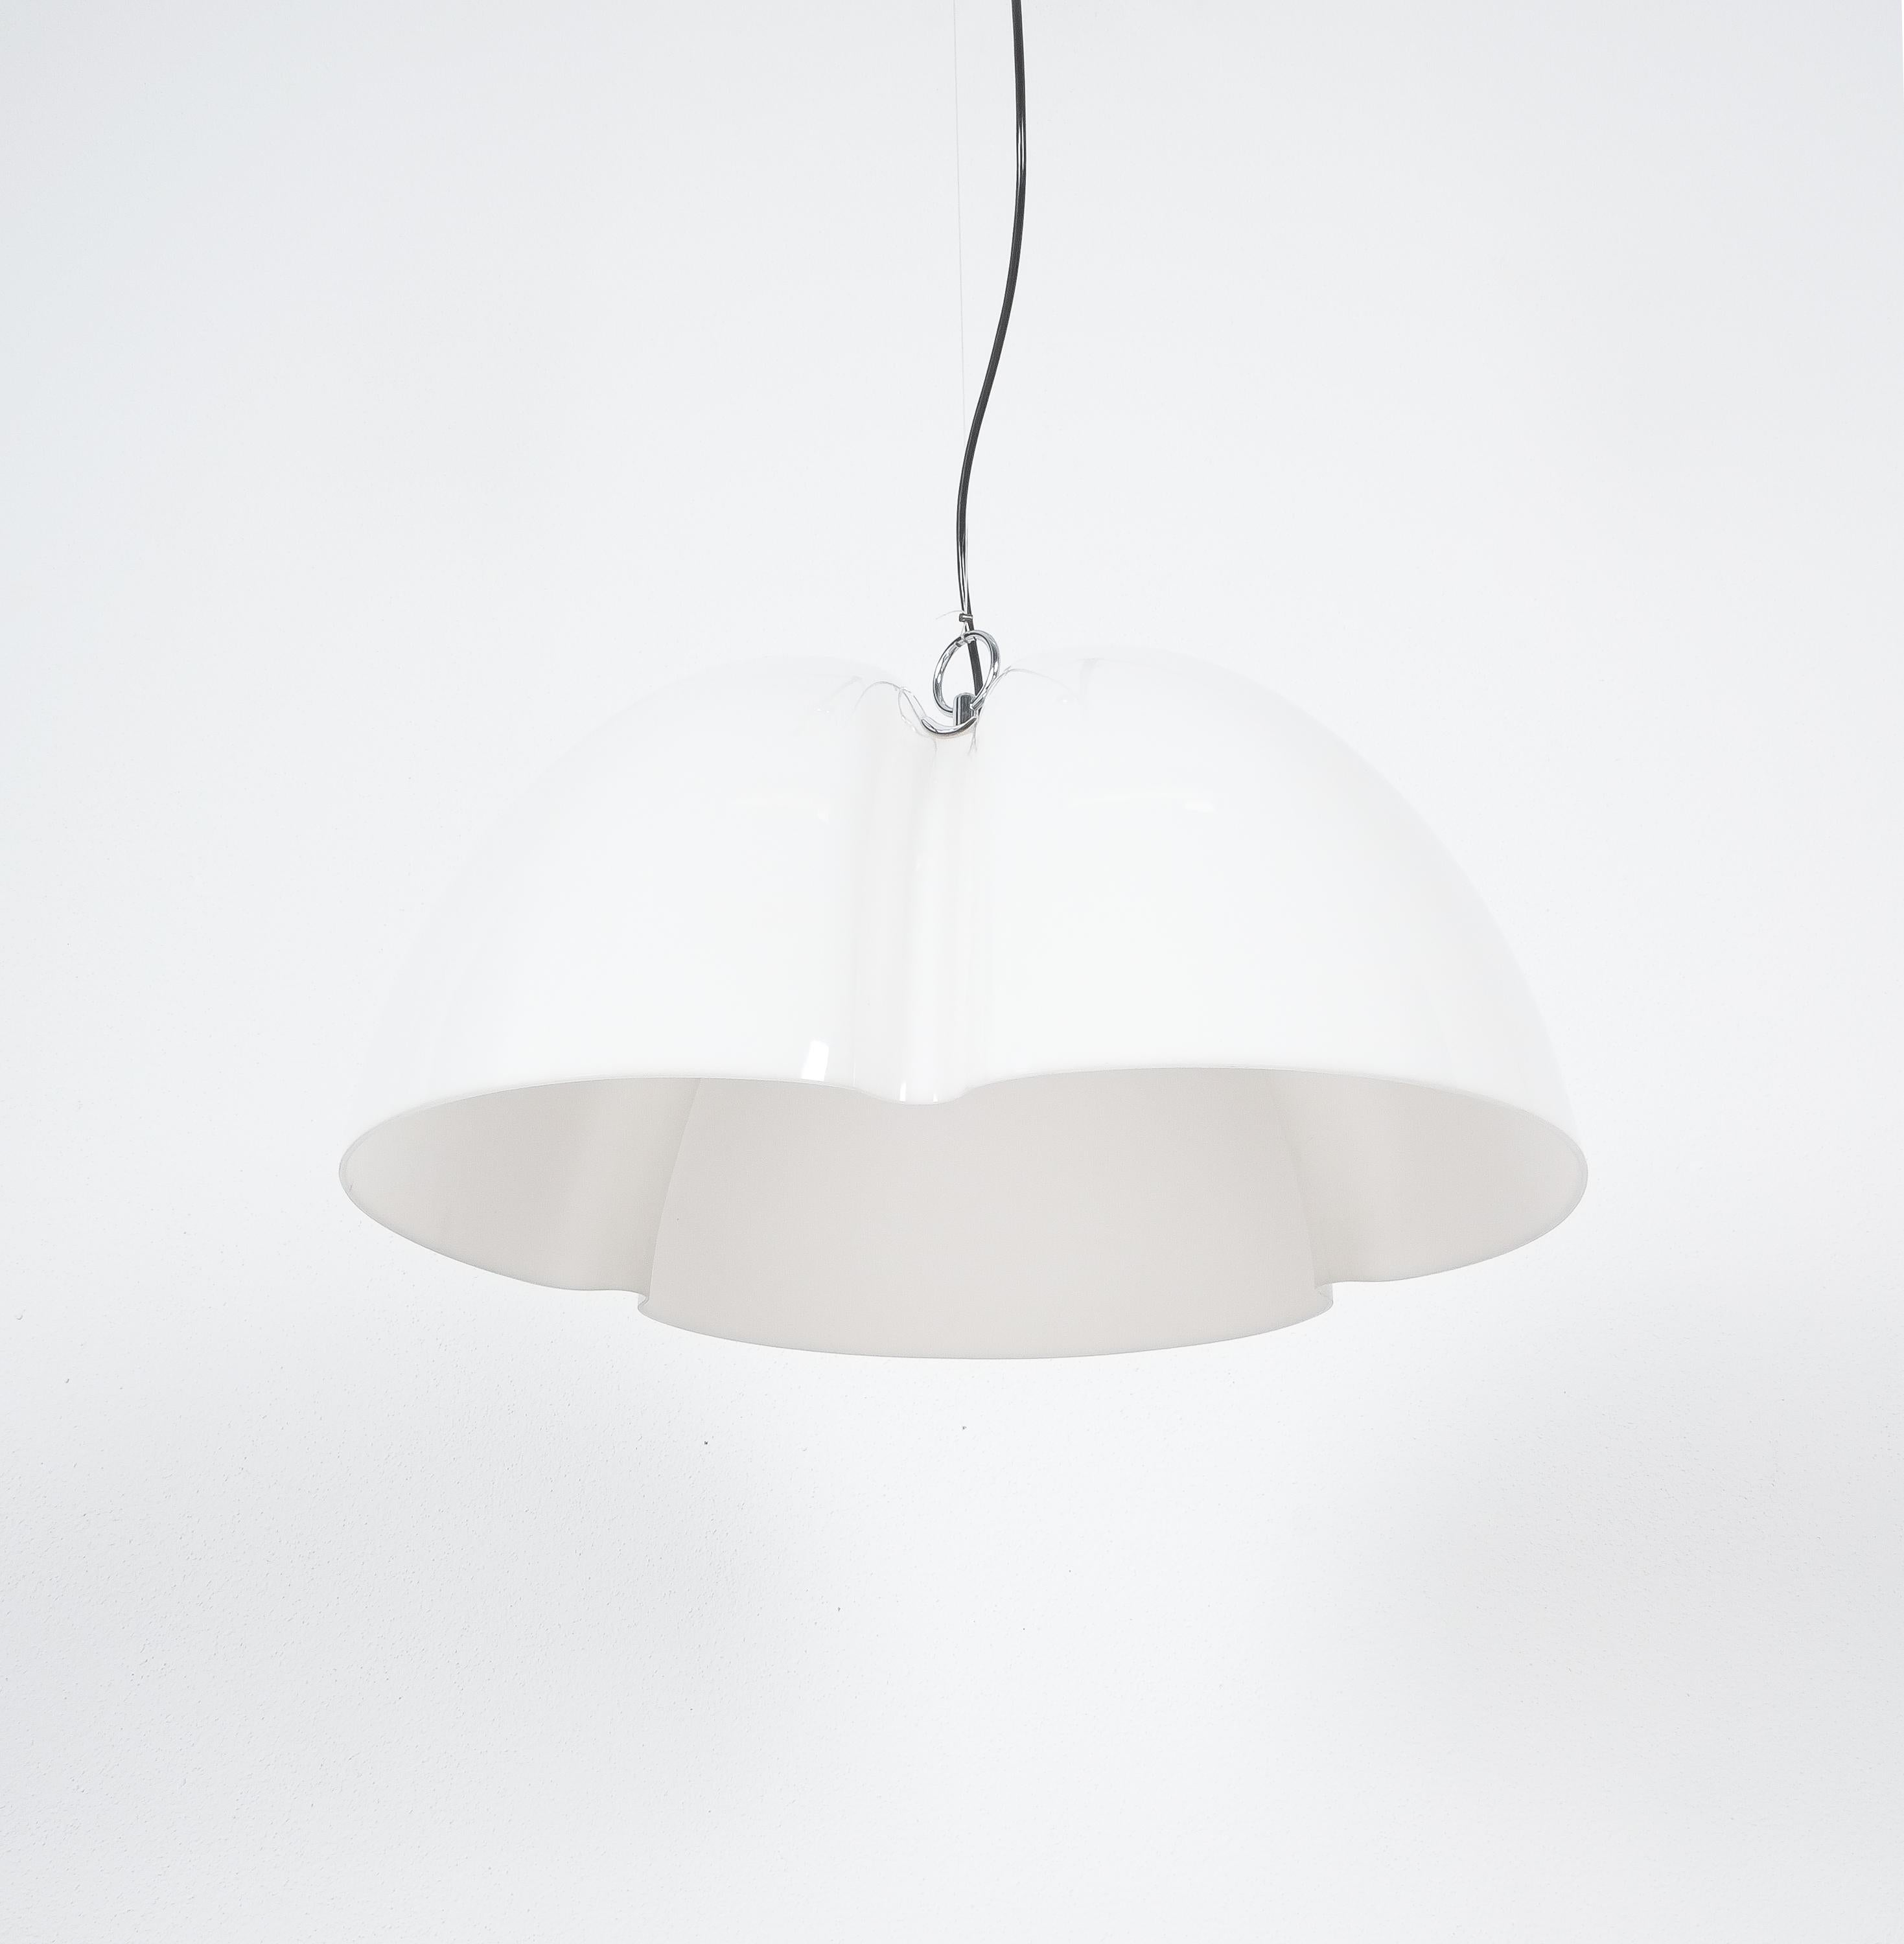 Large pendant lamp Tricena I by Ingo Maurer for Design M 1968, Munich, Germany

Cool light by the German Master of light Info Maurer. The Tricena I is the larger model available from this series with a diameter of approx 23“ featuring an opaque